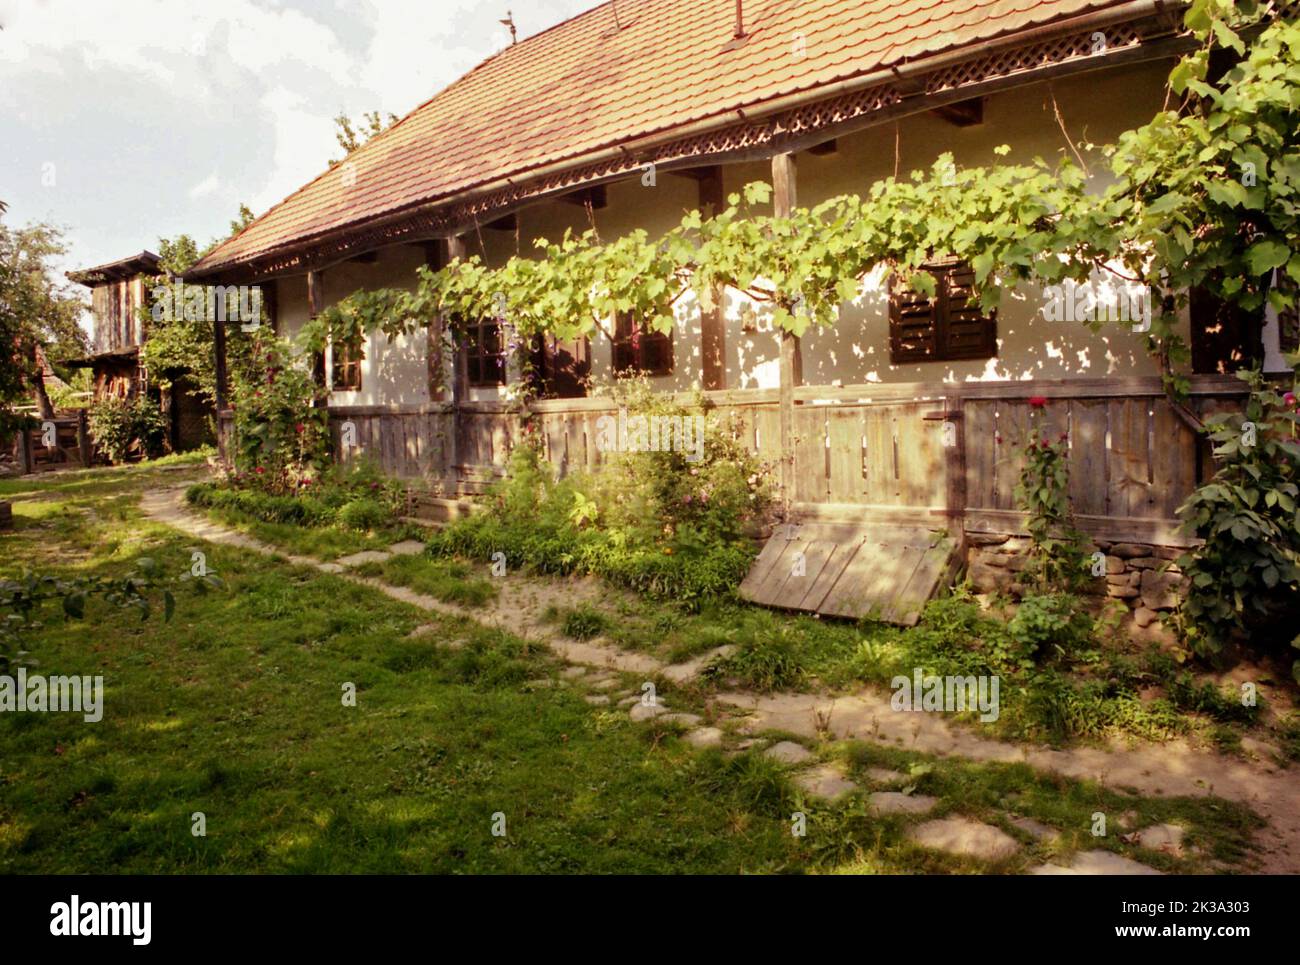 Poșaga, Alba County, Romania, approx. 1999. Old traditional house with wrap-around sculpted wooden porch and climbing grapevine. Stock Photo